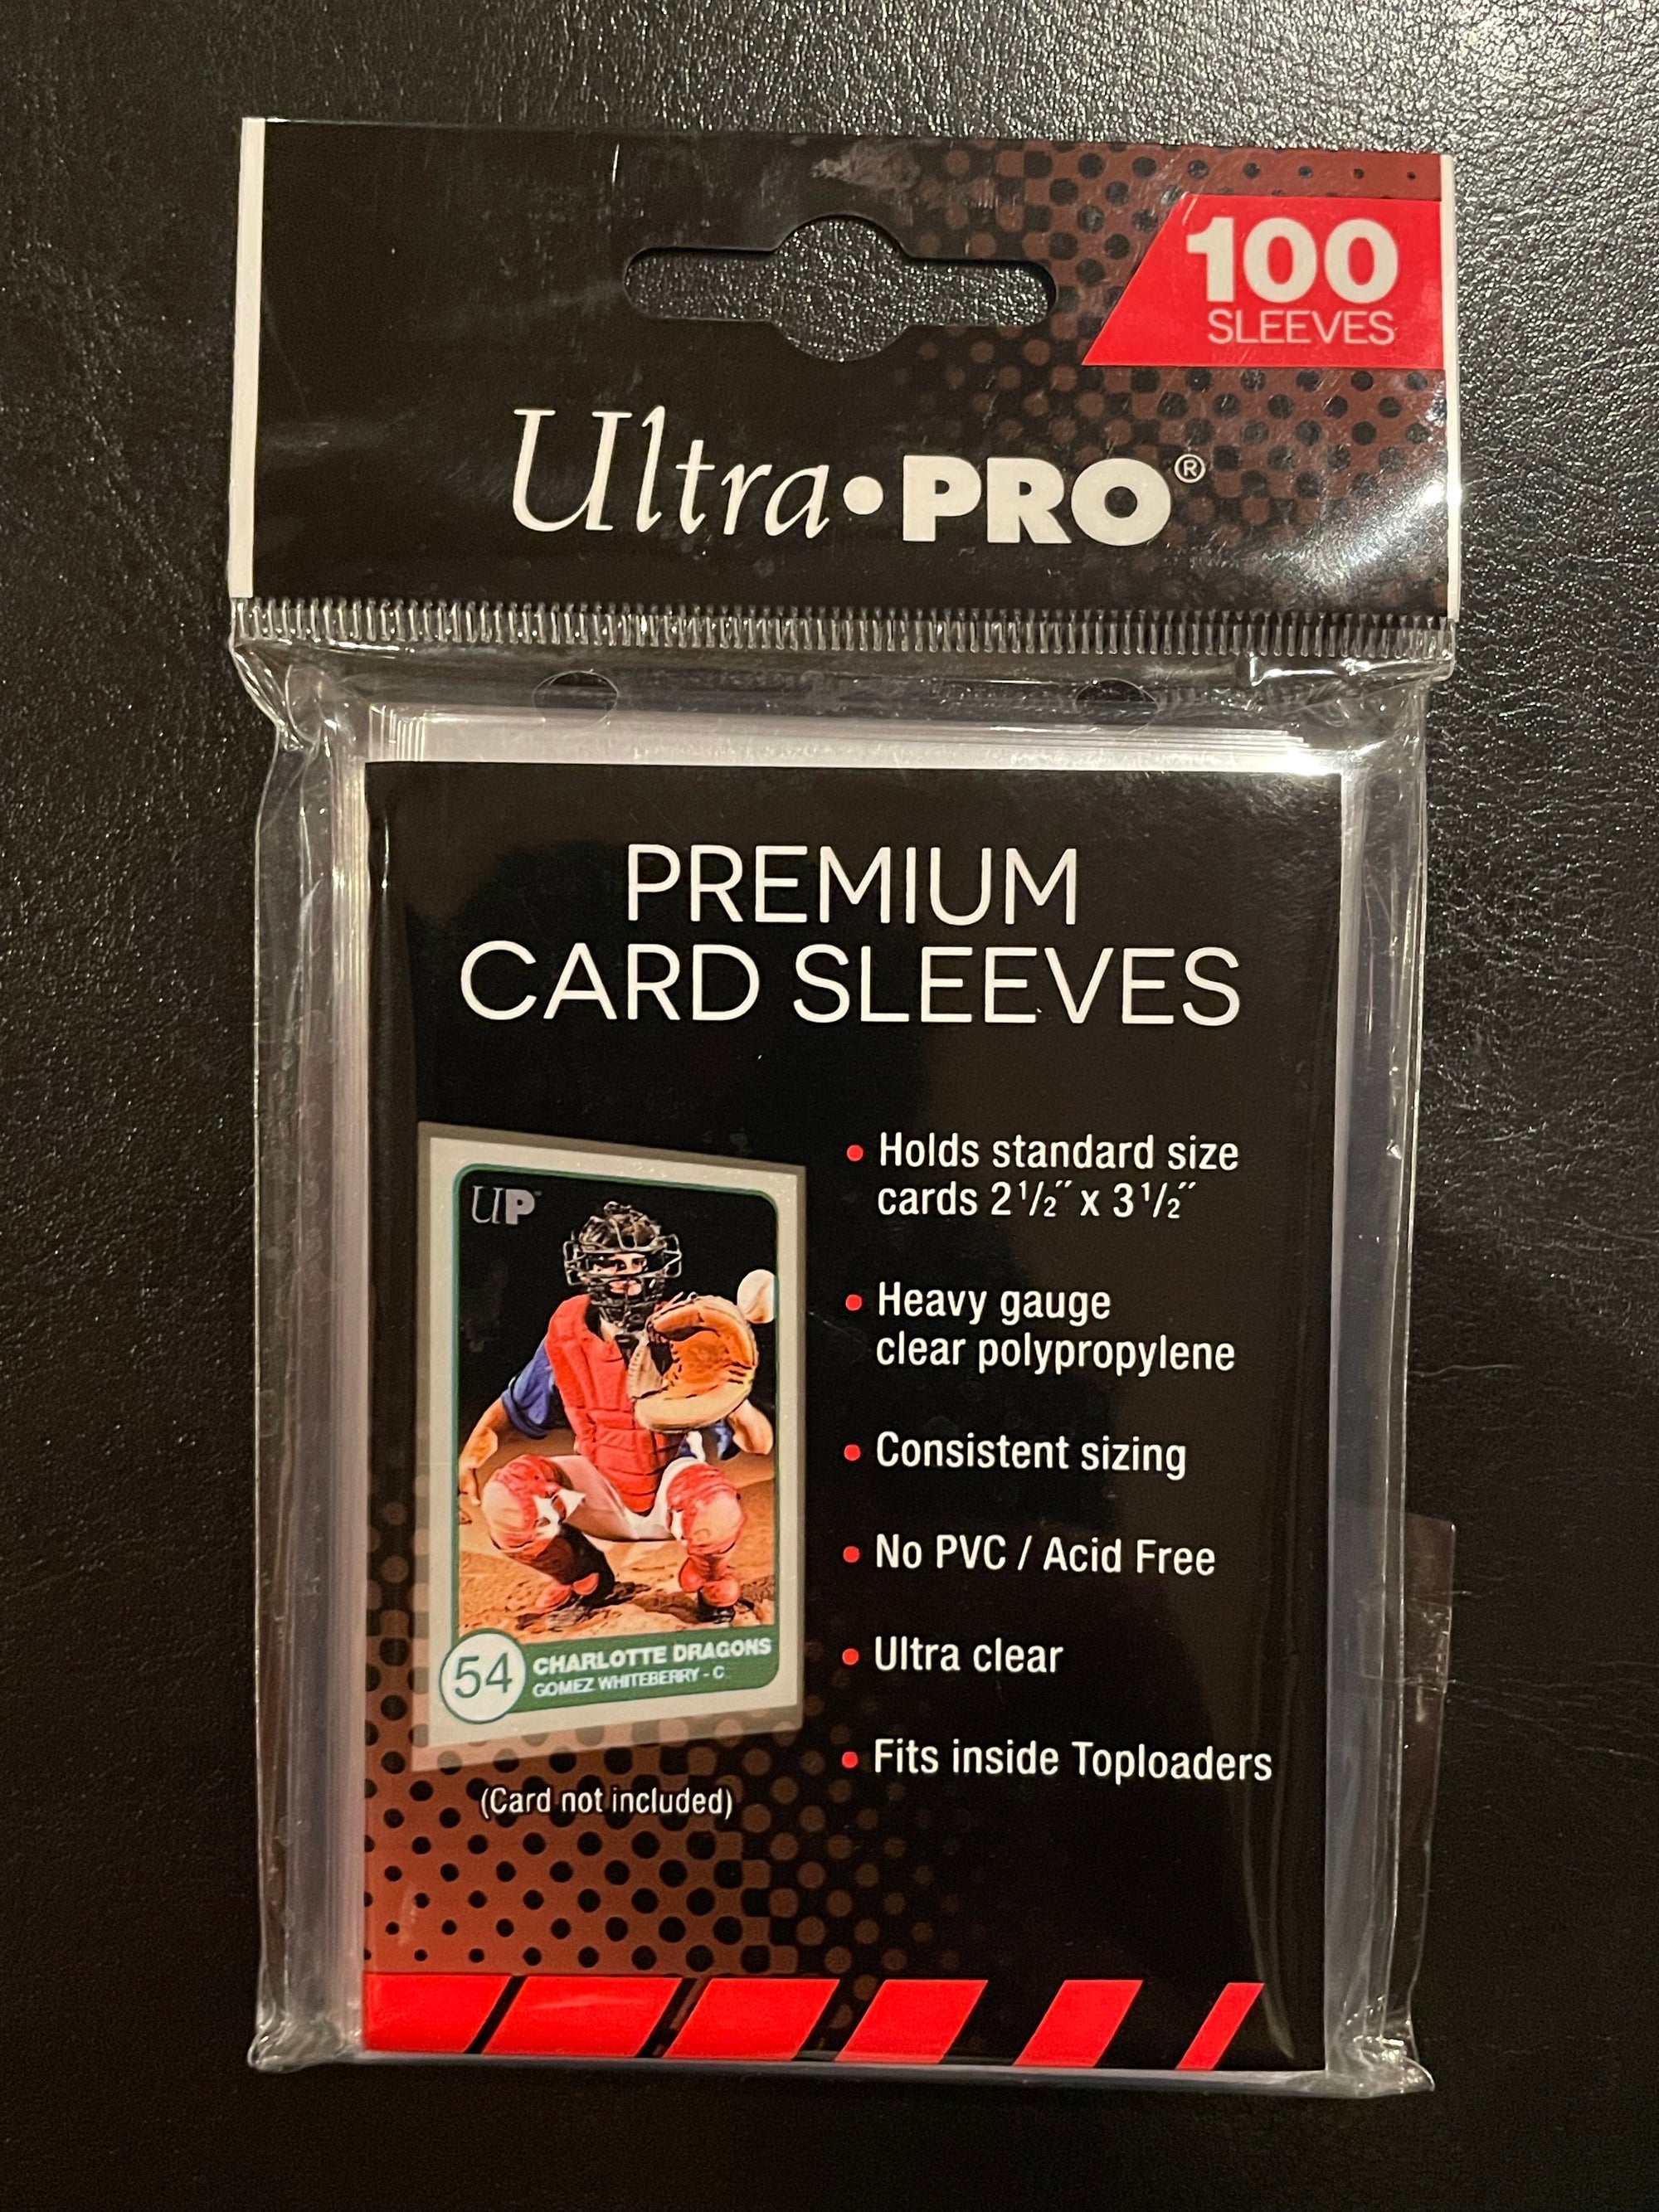 Ultra Pro sleeves - Platinum - Premium card sleeves in use in